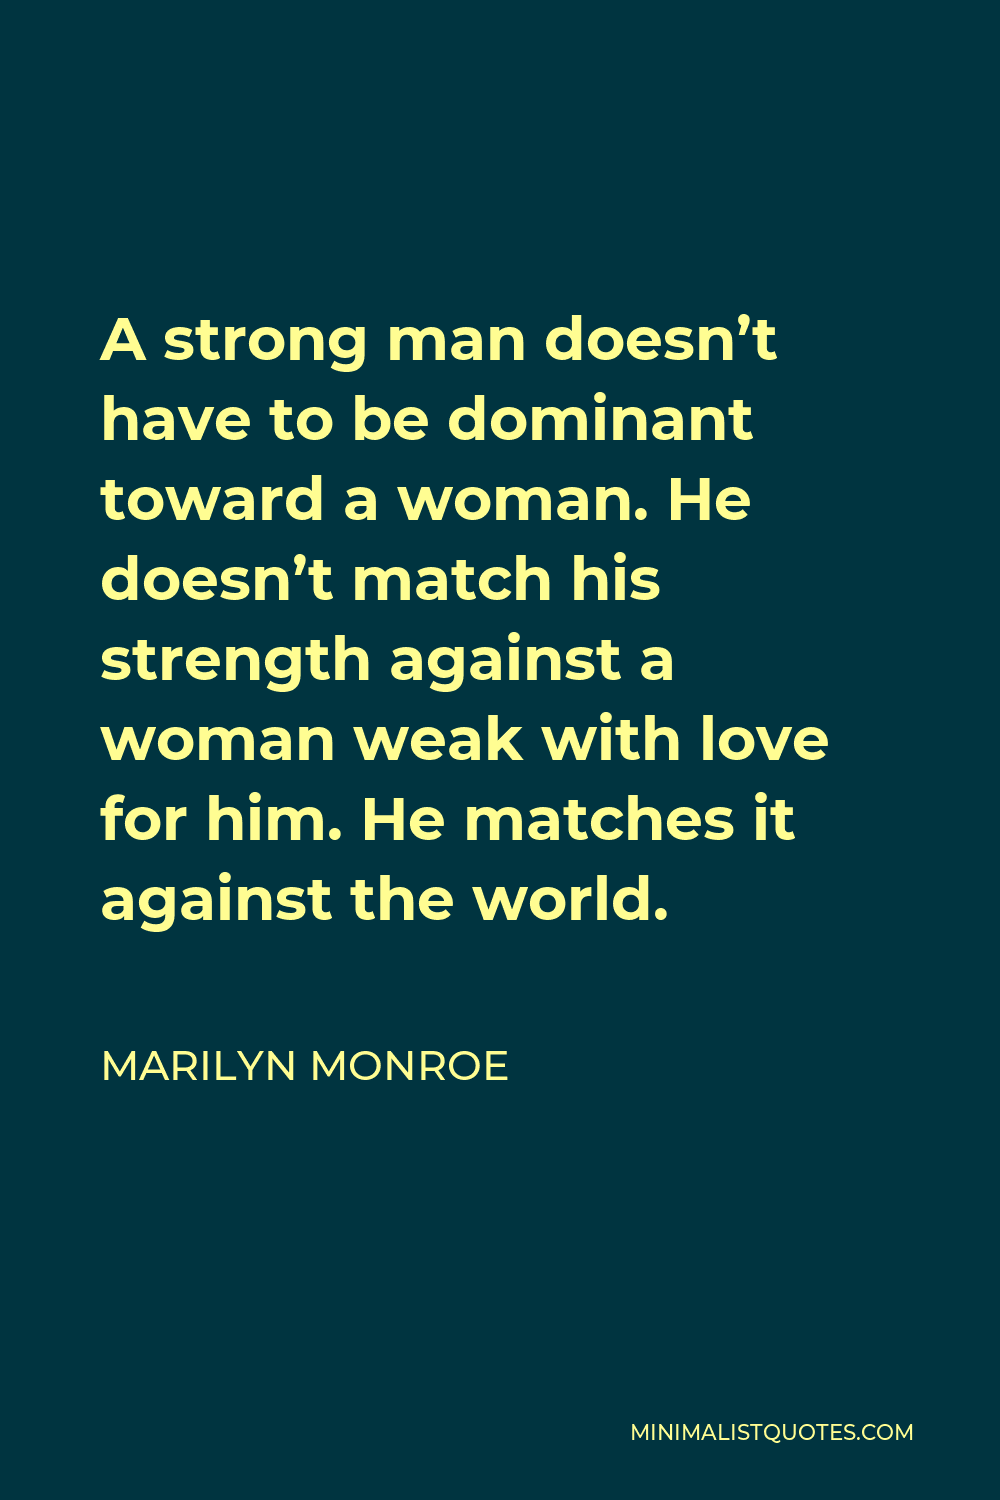 Marilyn Monroe Quote - A strong man doesn’t have to be dominant toward a woman. He doesn’t match his strength against a woman weak with love for him. He matches it against the world.